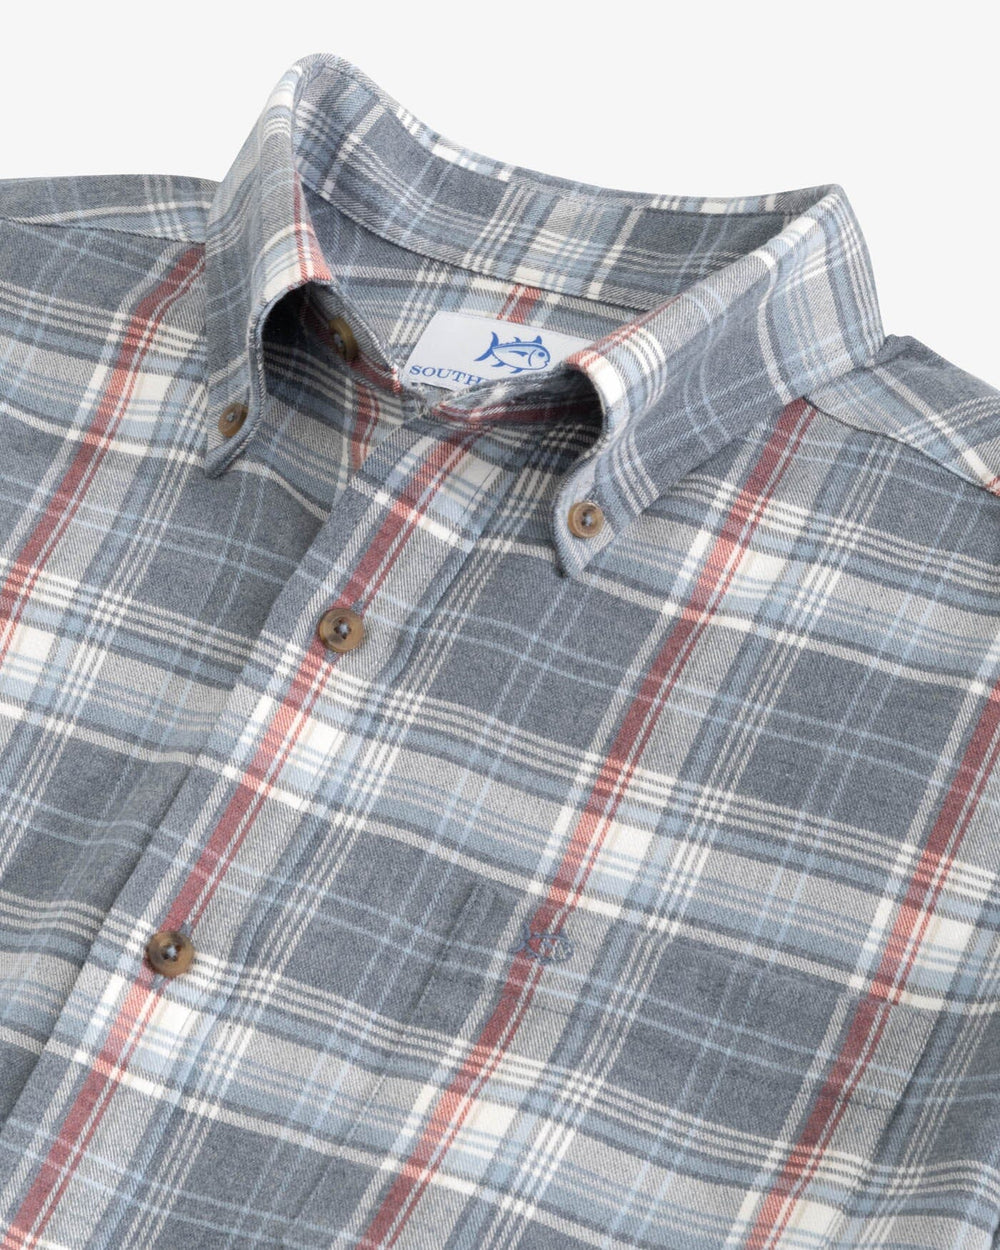 The detail view of the Southern Tide Heather Longleaf Plaid Intercoastal Flannel Sport Shirts by Southern Tide - Heather Dress Blue